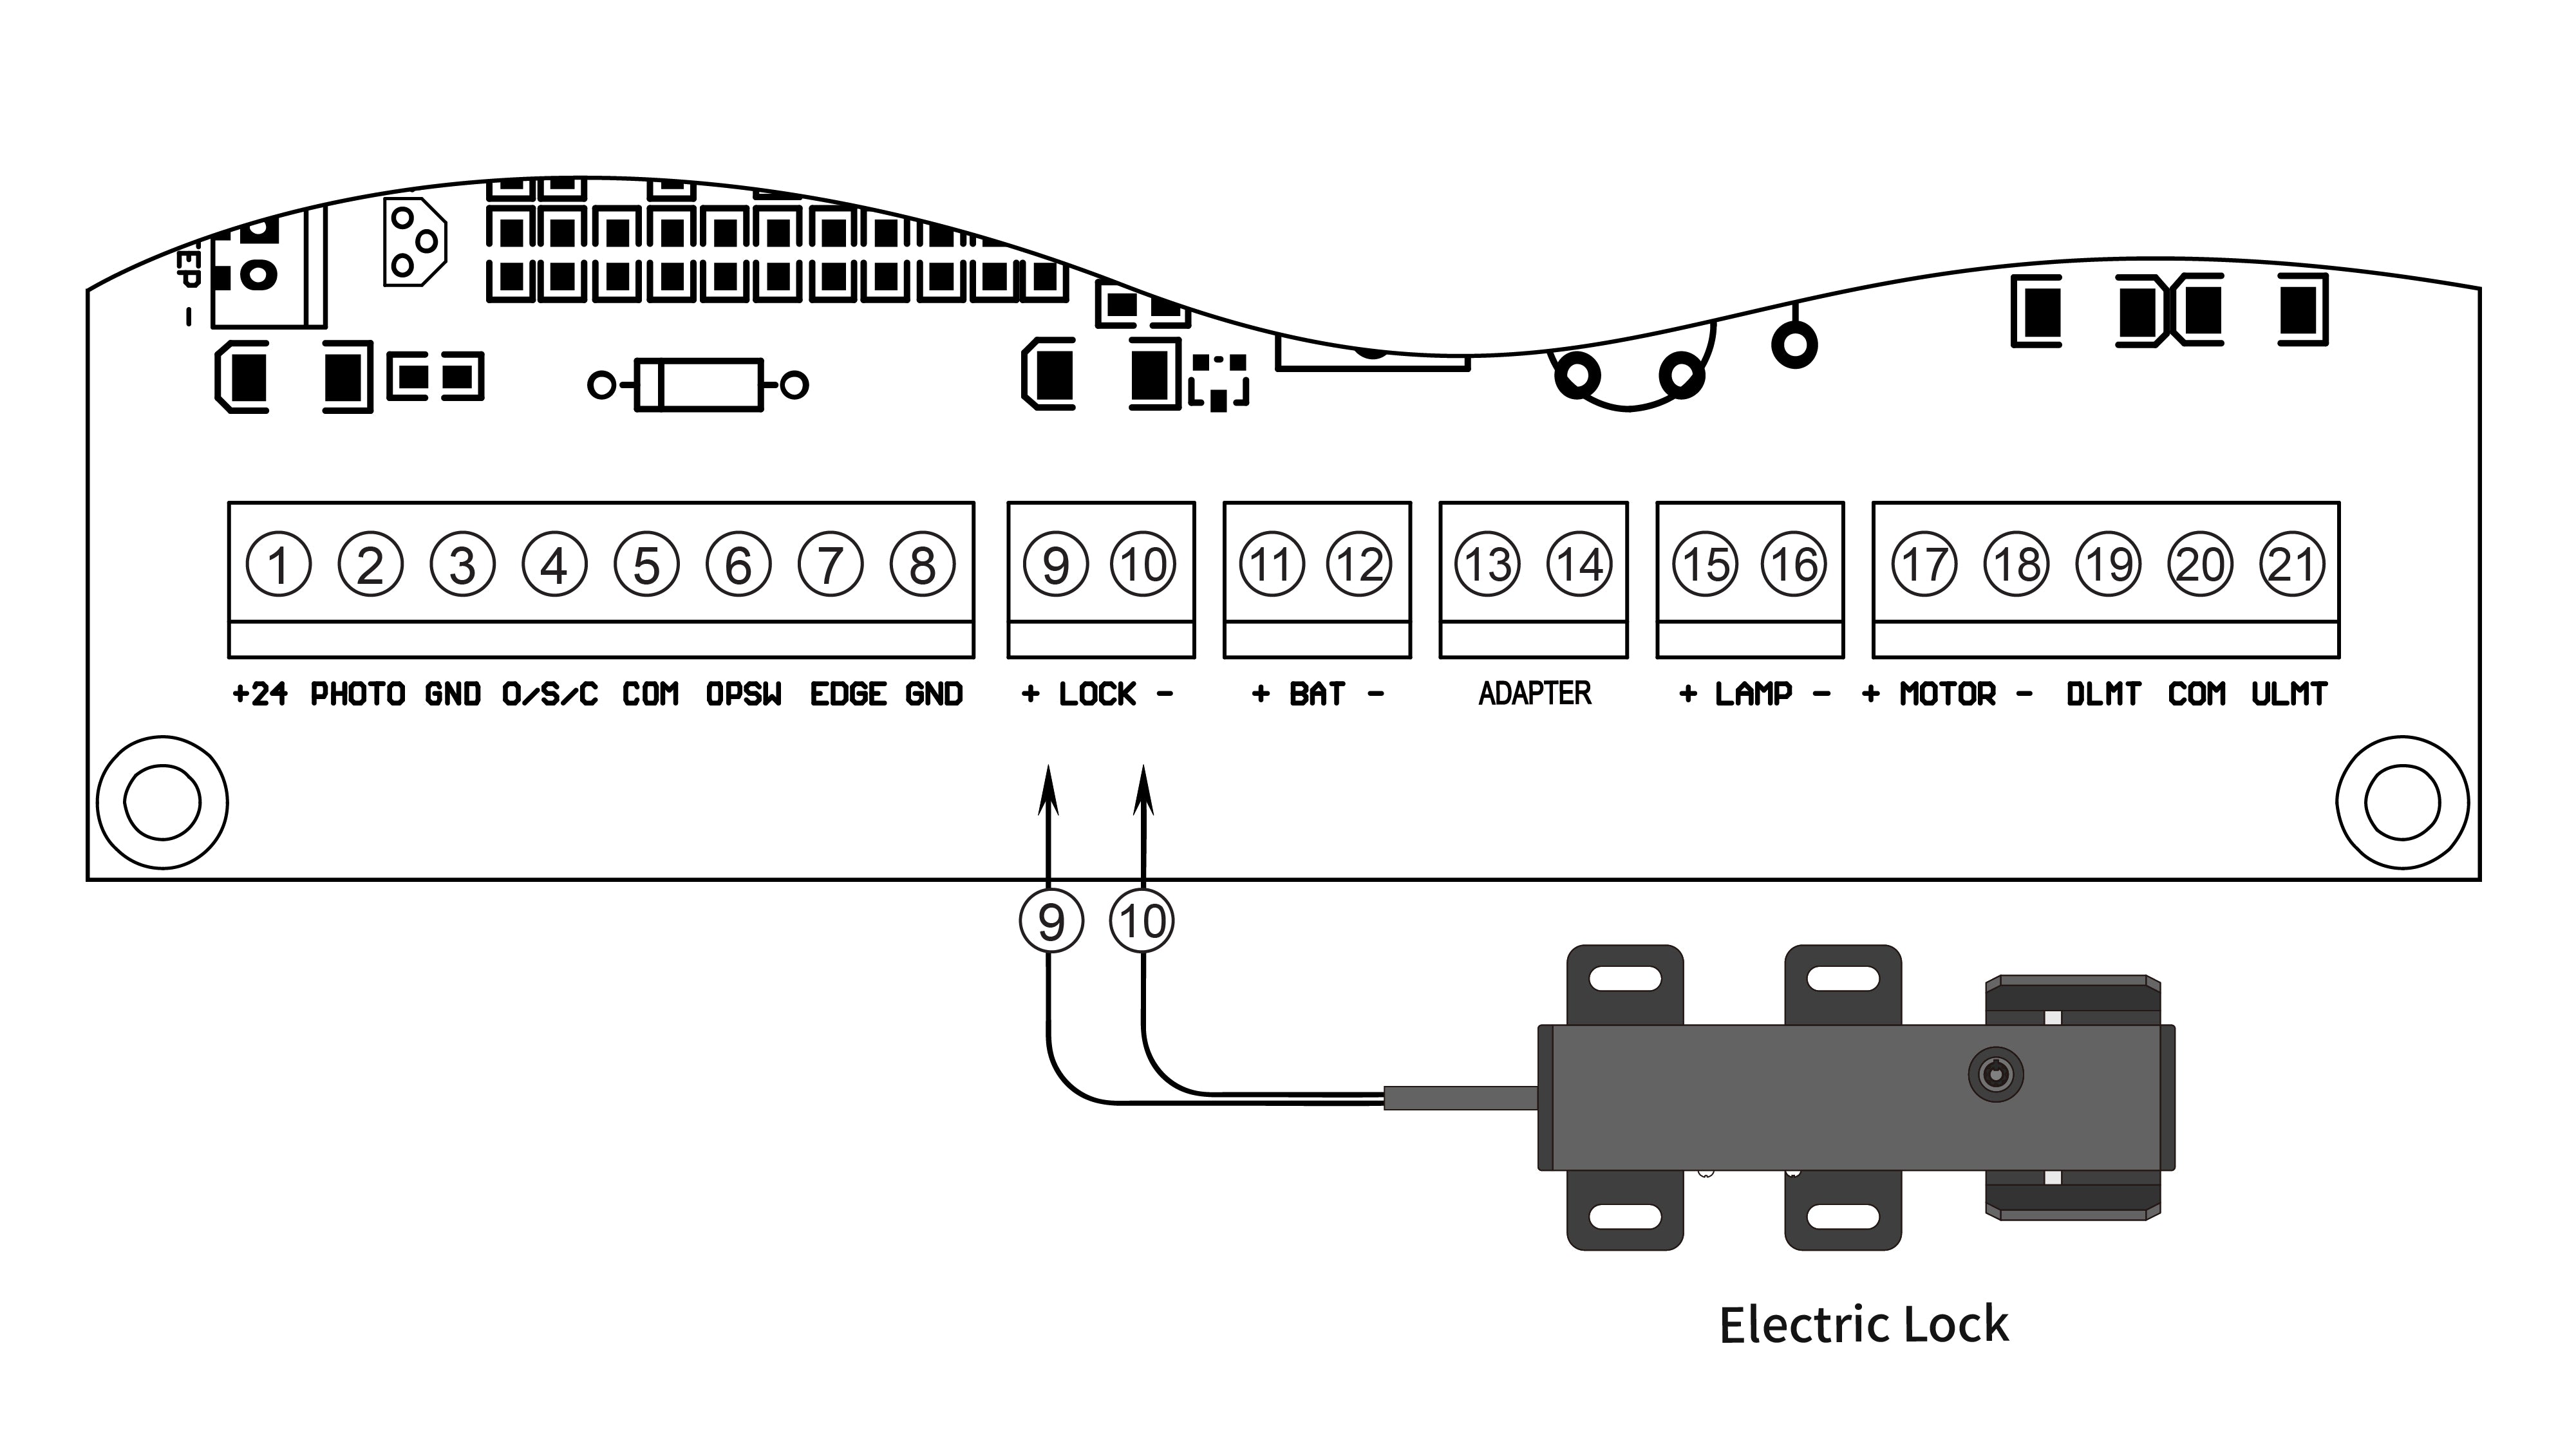 How to Install TOPENS ET24 Electric Gate Lock